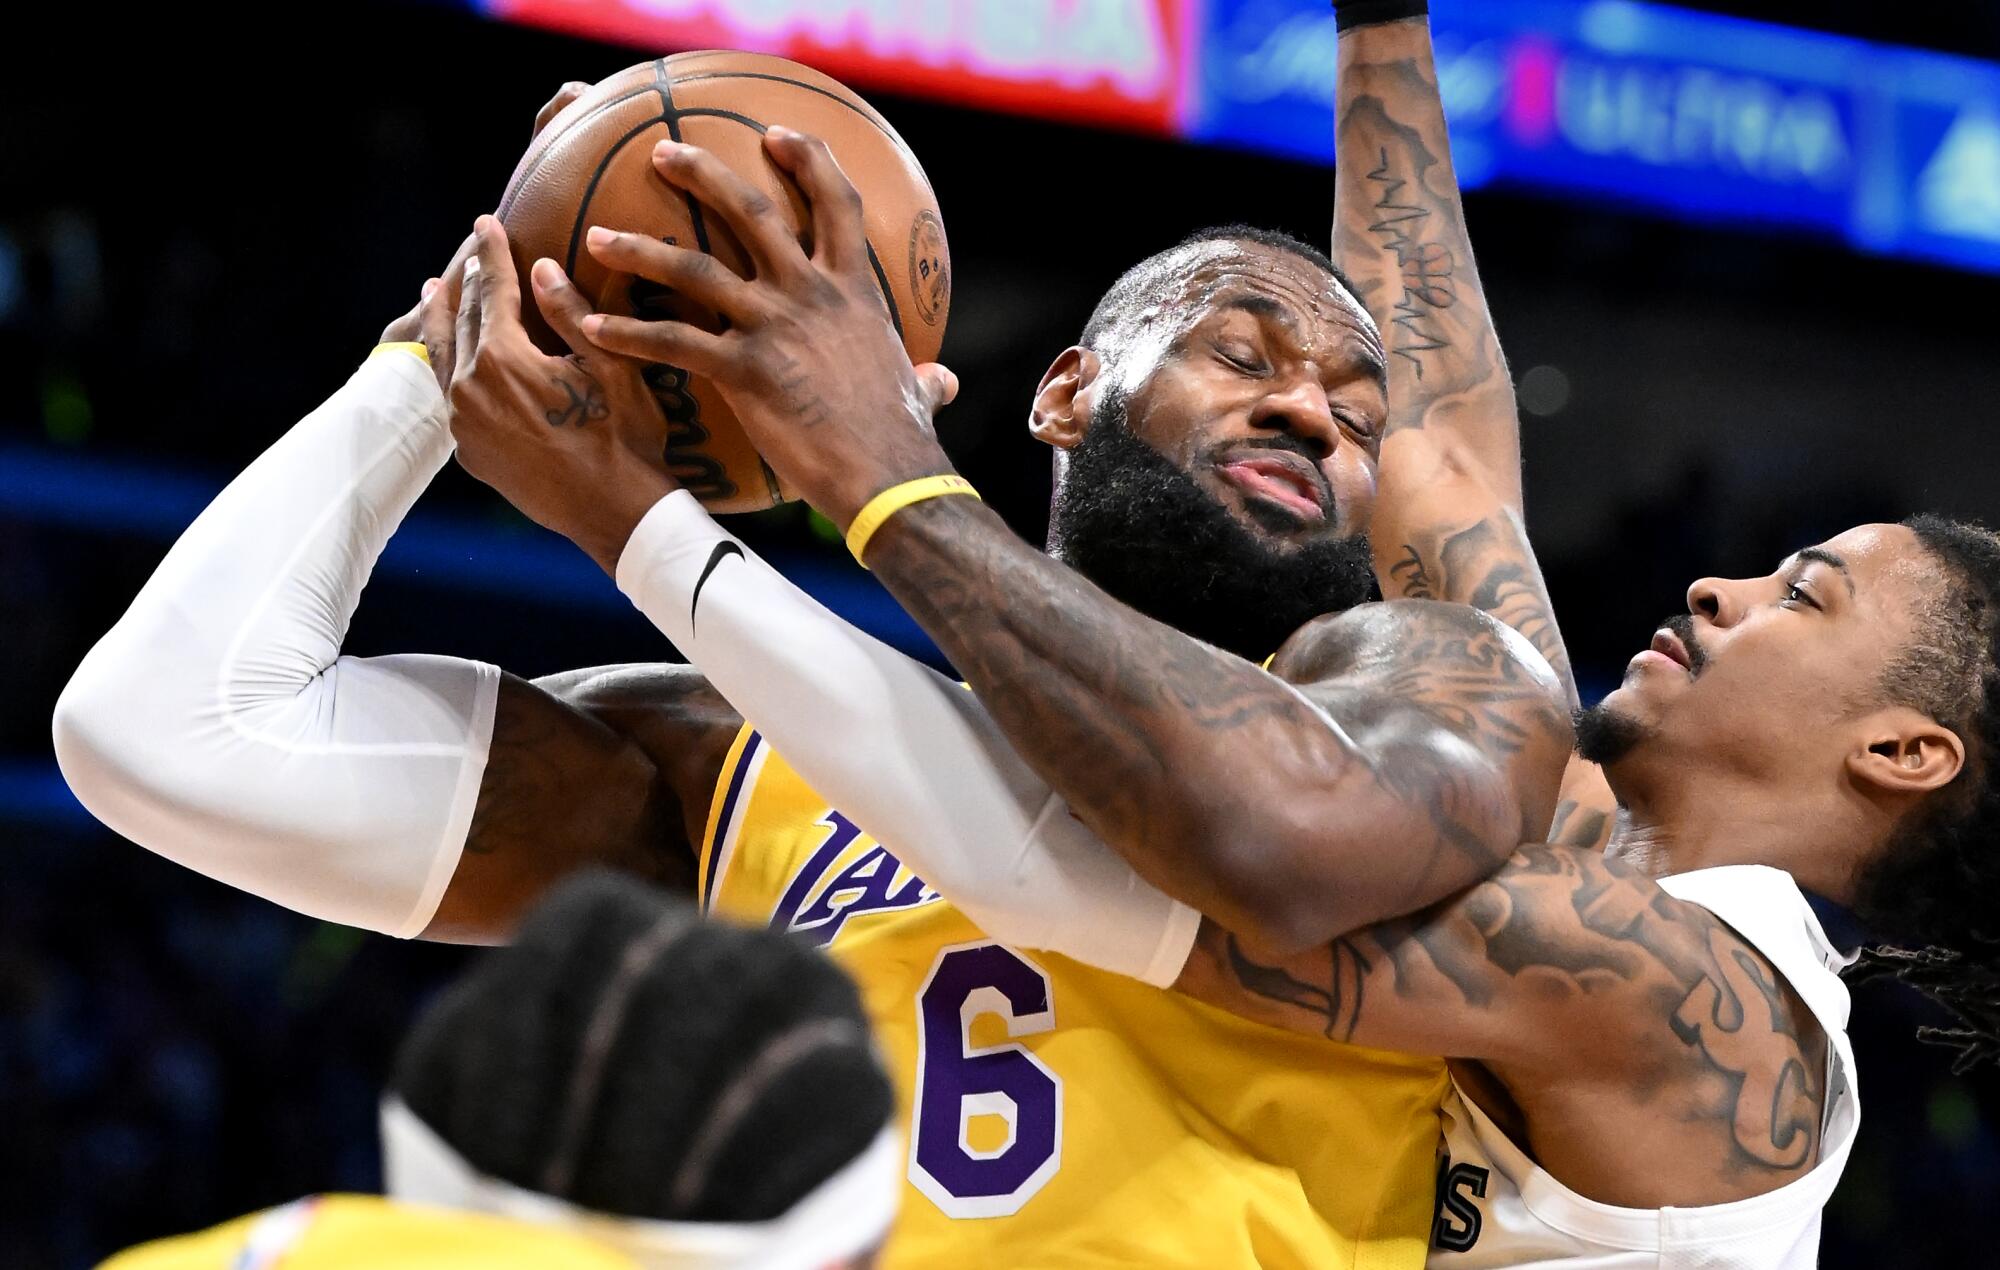 Lakers star LeBron James grabs a rebound away from Memphis Grizzlies star Ja Morant.